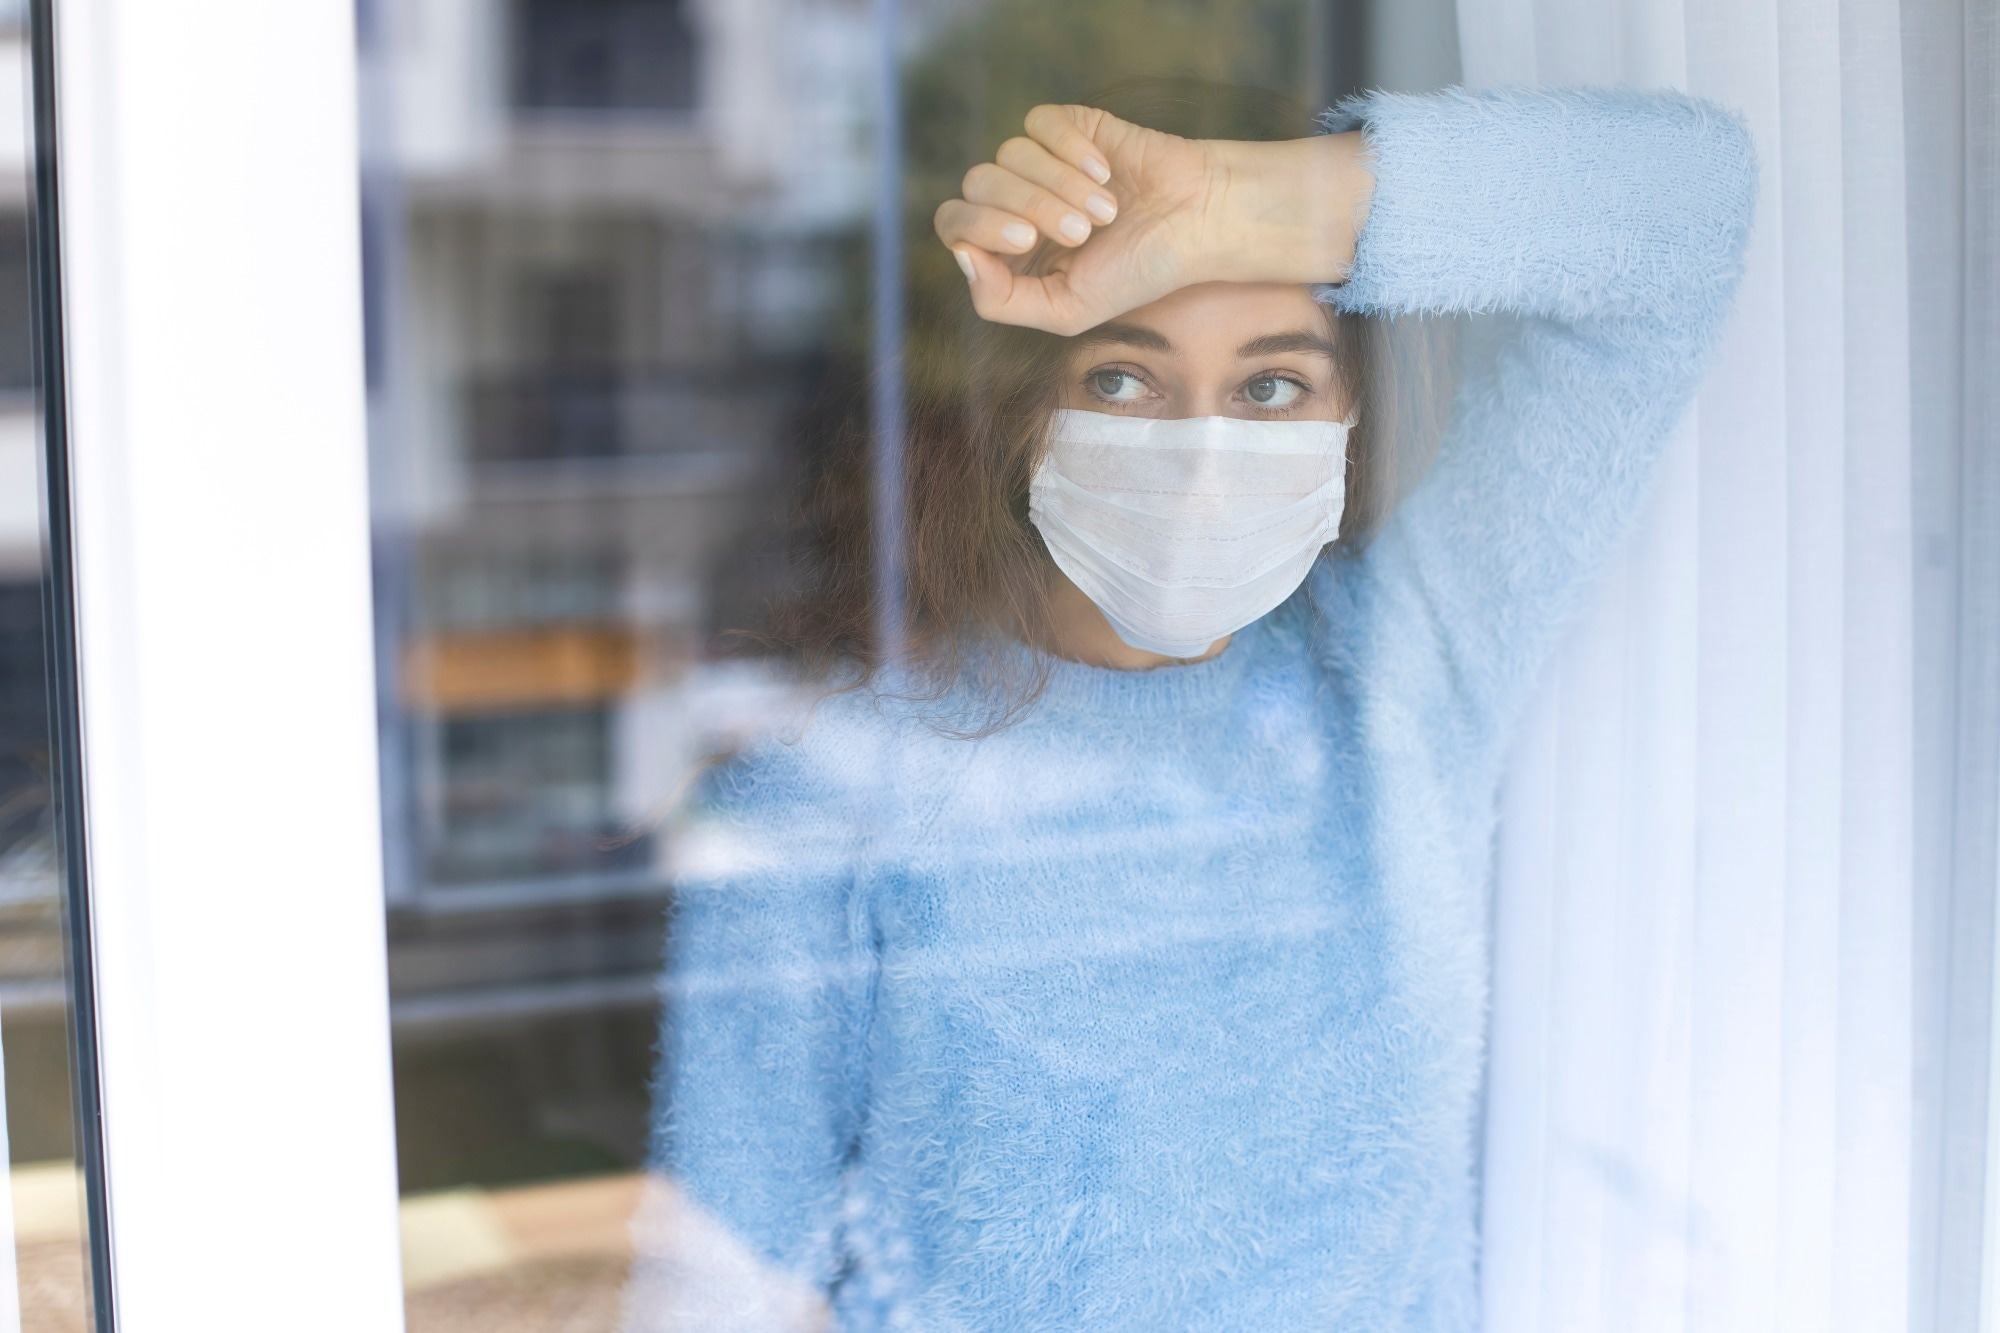 Study: Hospitalizations Associated With Mental Health Conditions Among Adolescents in the US and France During the COVID-19 Pandemic. Image Credit: Ahmet Misirligul/Shutterstock